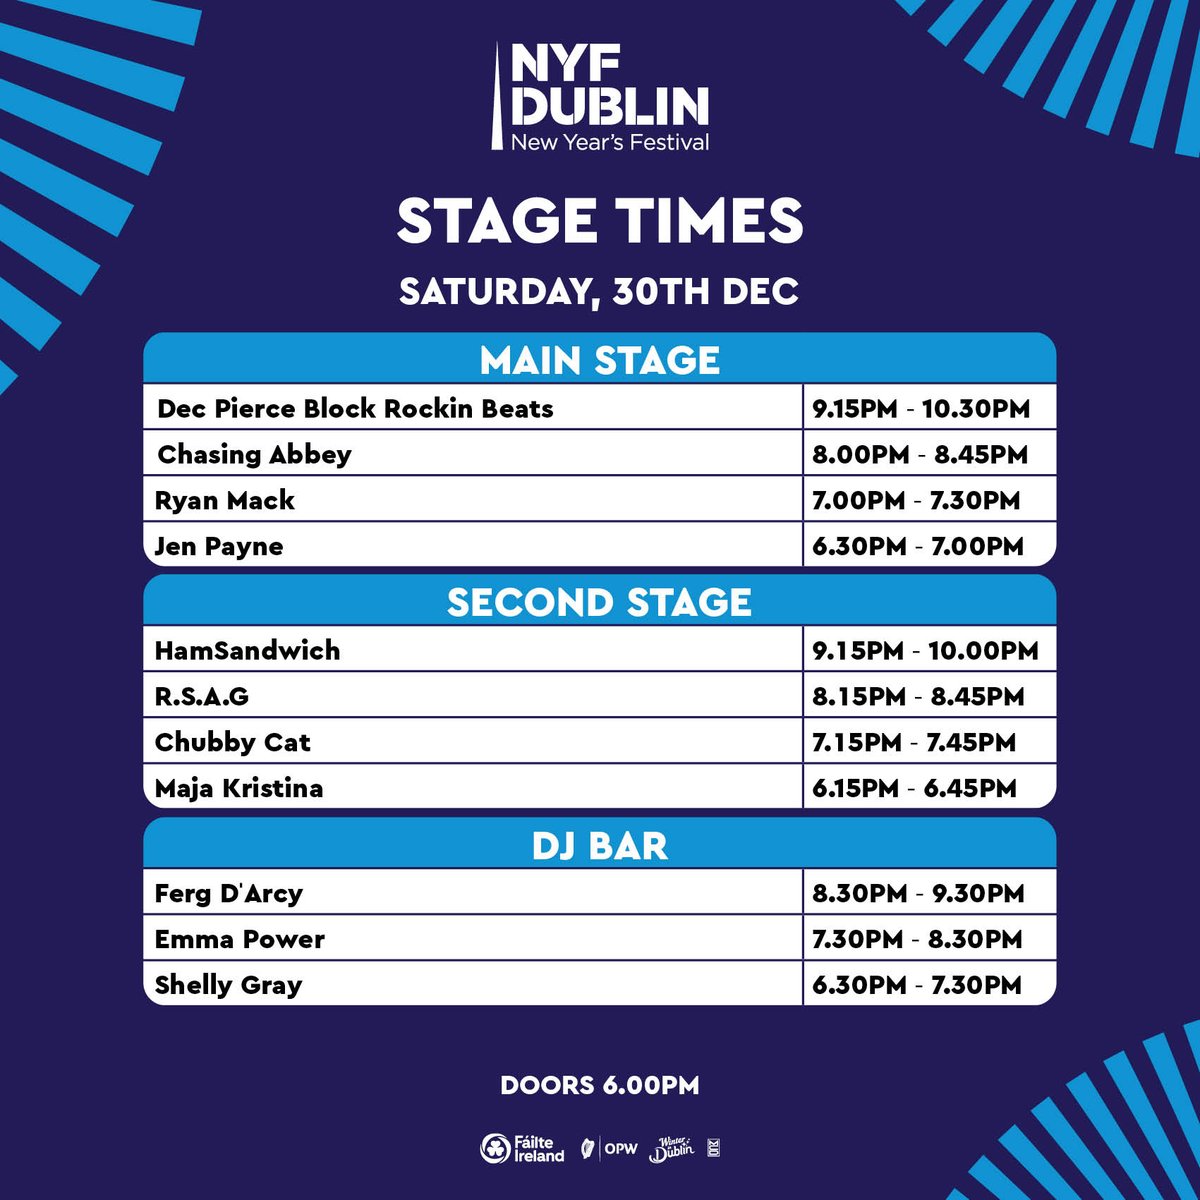 ⭕️UPDATED STAGE TIMES ⭕️ ✨ Day 2 is here, and it's time to create unforgettable memories at Collins Barracks @NMIreland Strictly Over 18's Event. Final tickets on sale now from Ticketmaster. 📷 For full info visit nyfdublin.com #TheOnlyPlaceToBe #NYFDublin